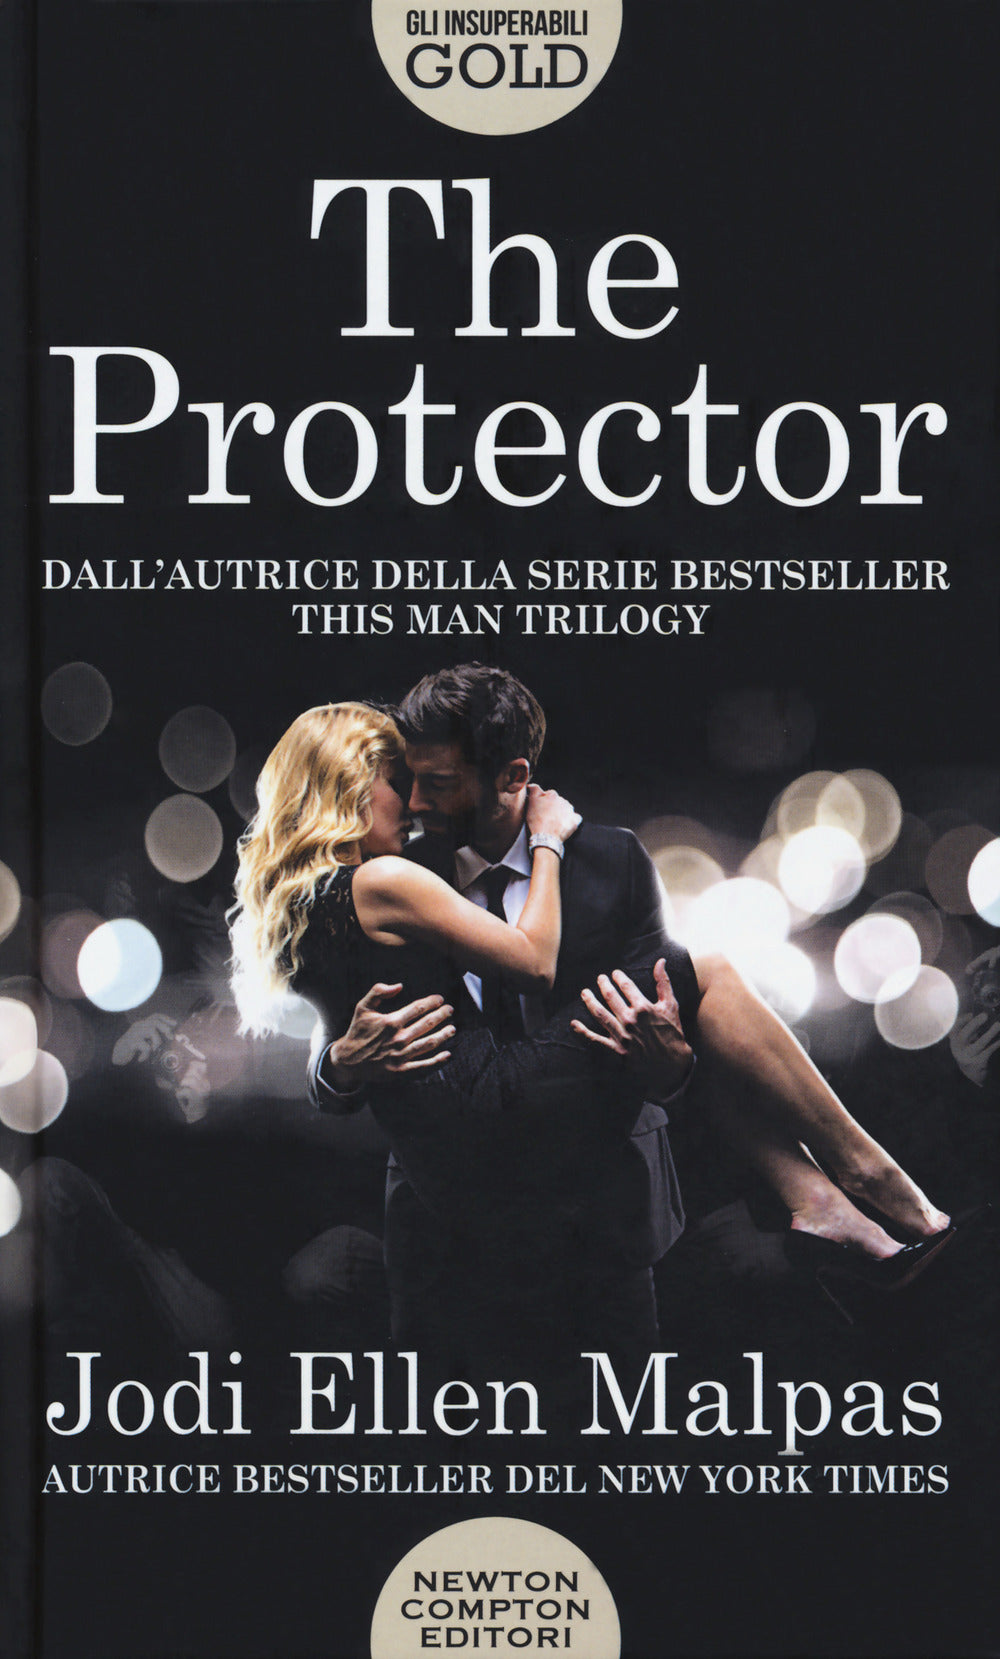 The protector.